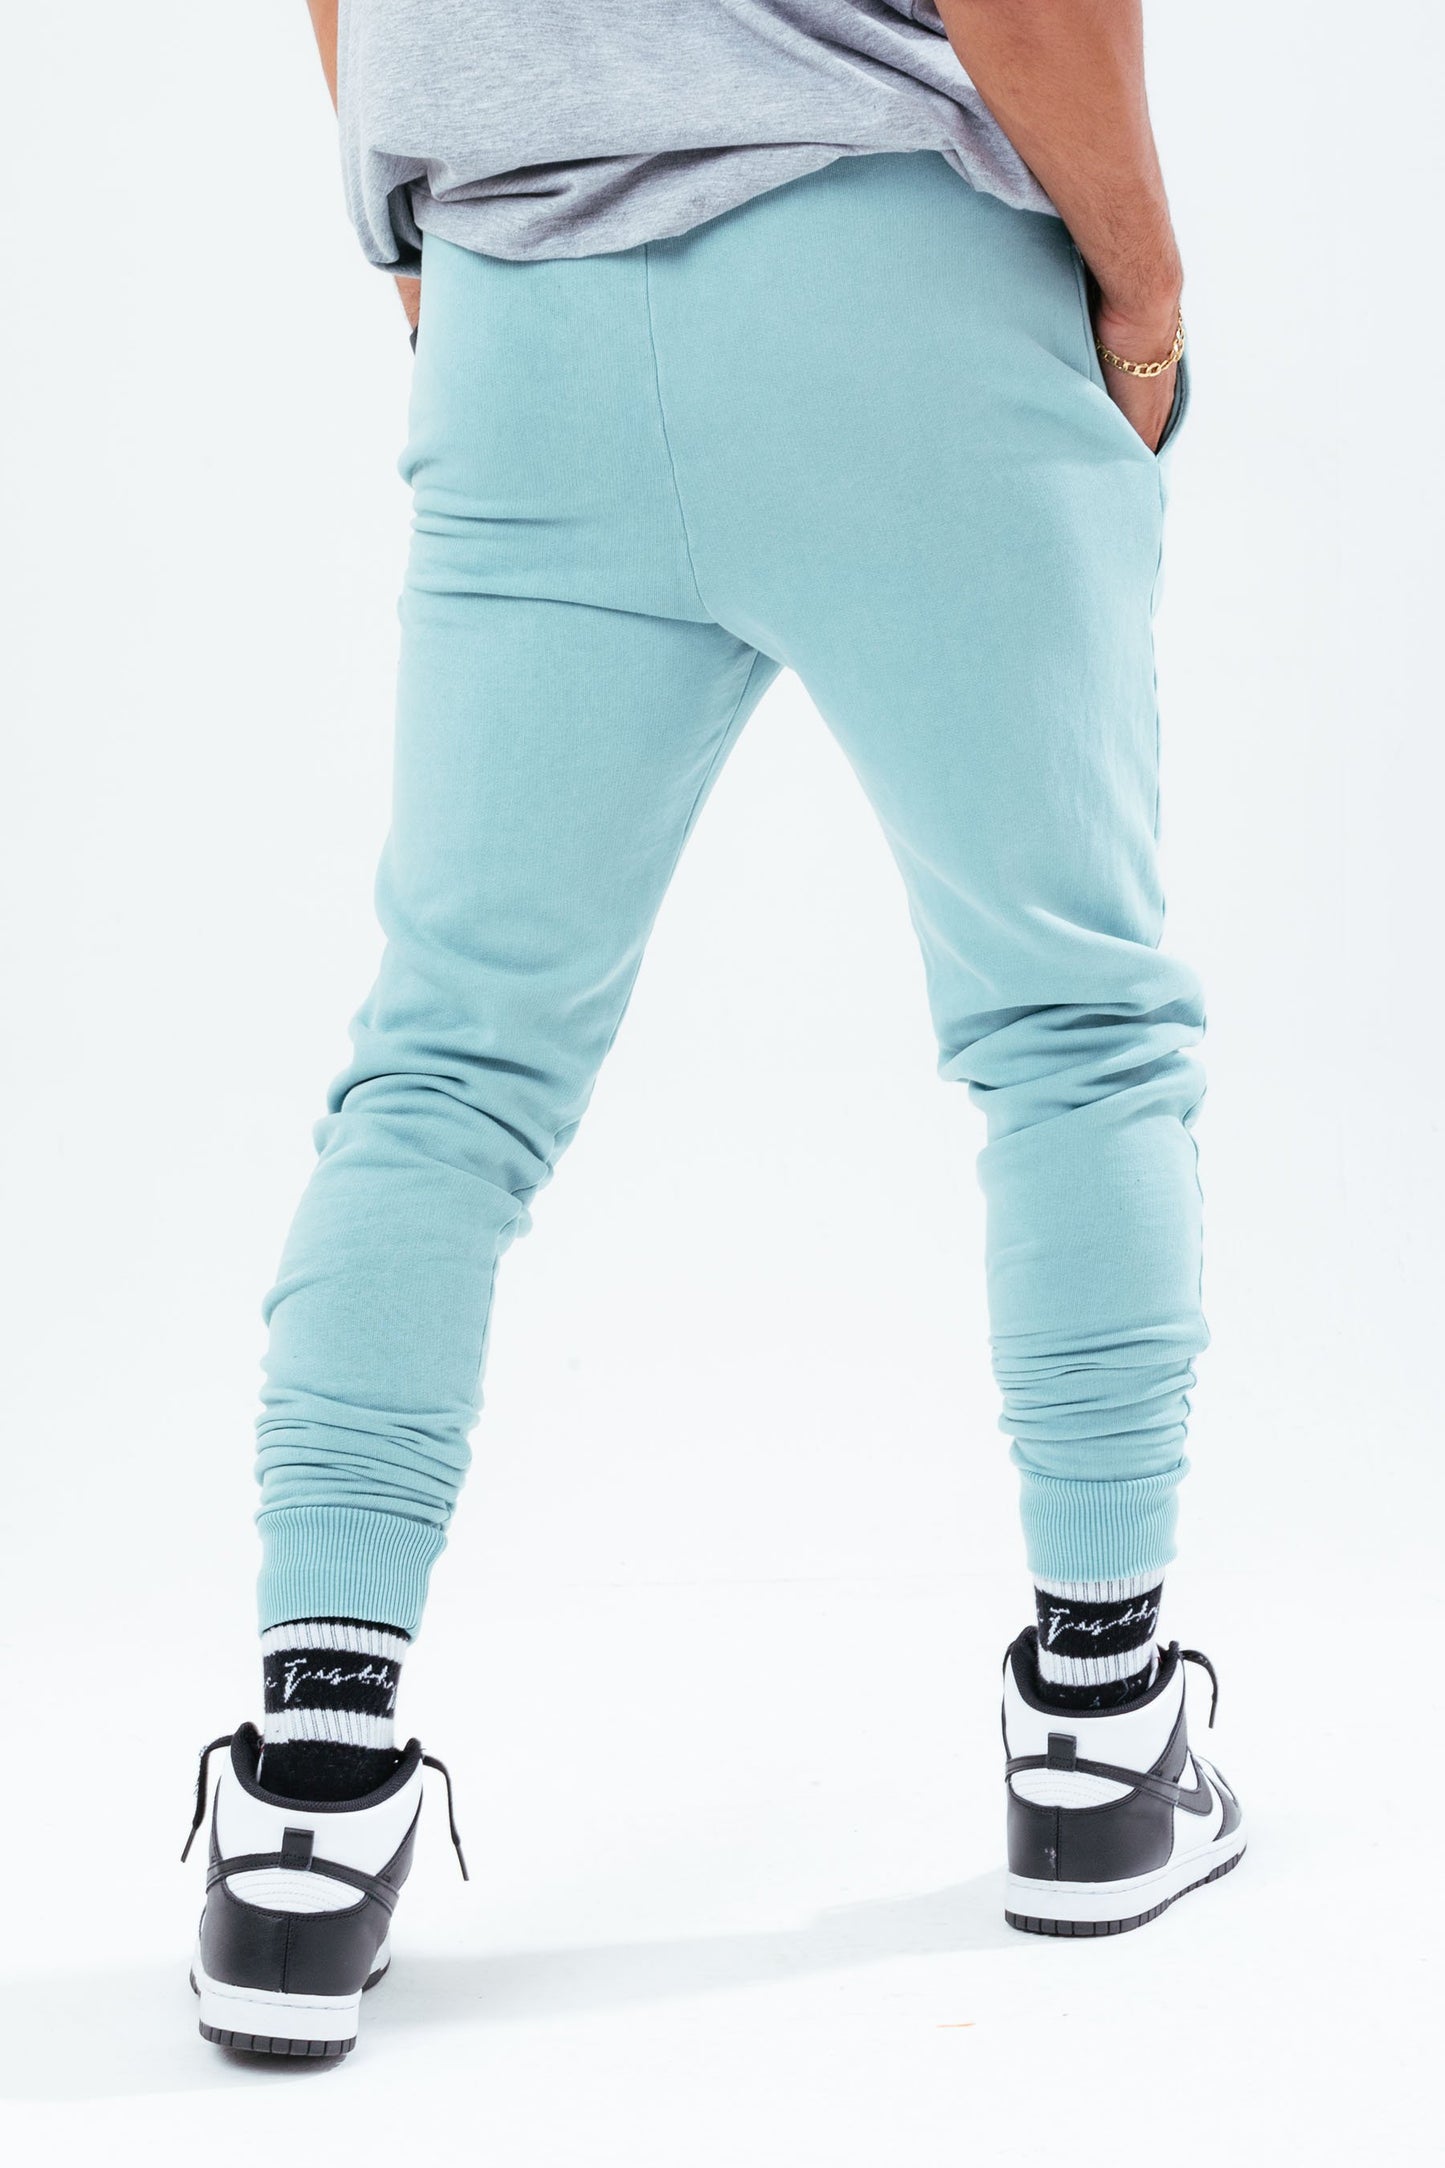 HYPE MIDNIGHT TEAL VINTAGE OVERSIZED MEN'S JOGGERS